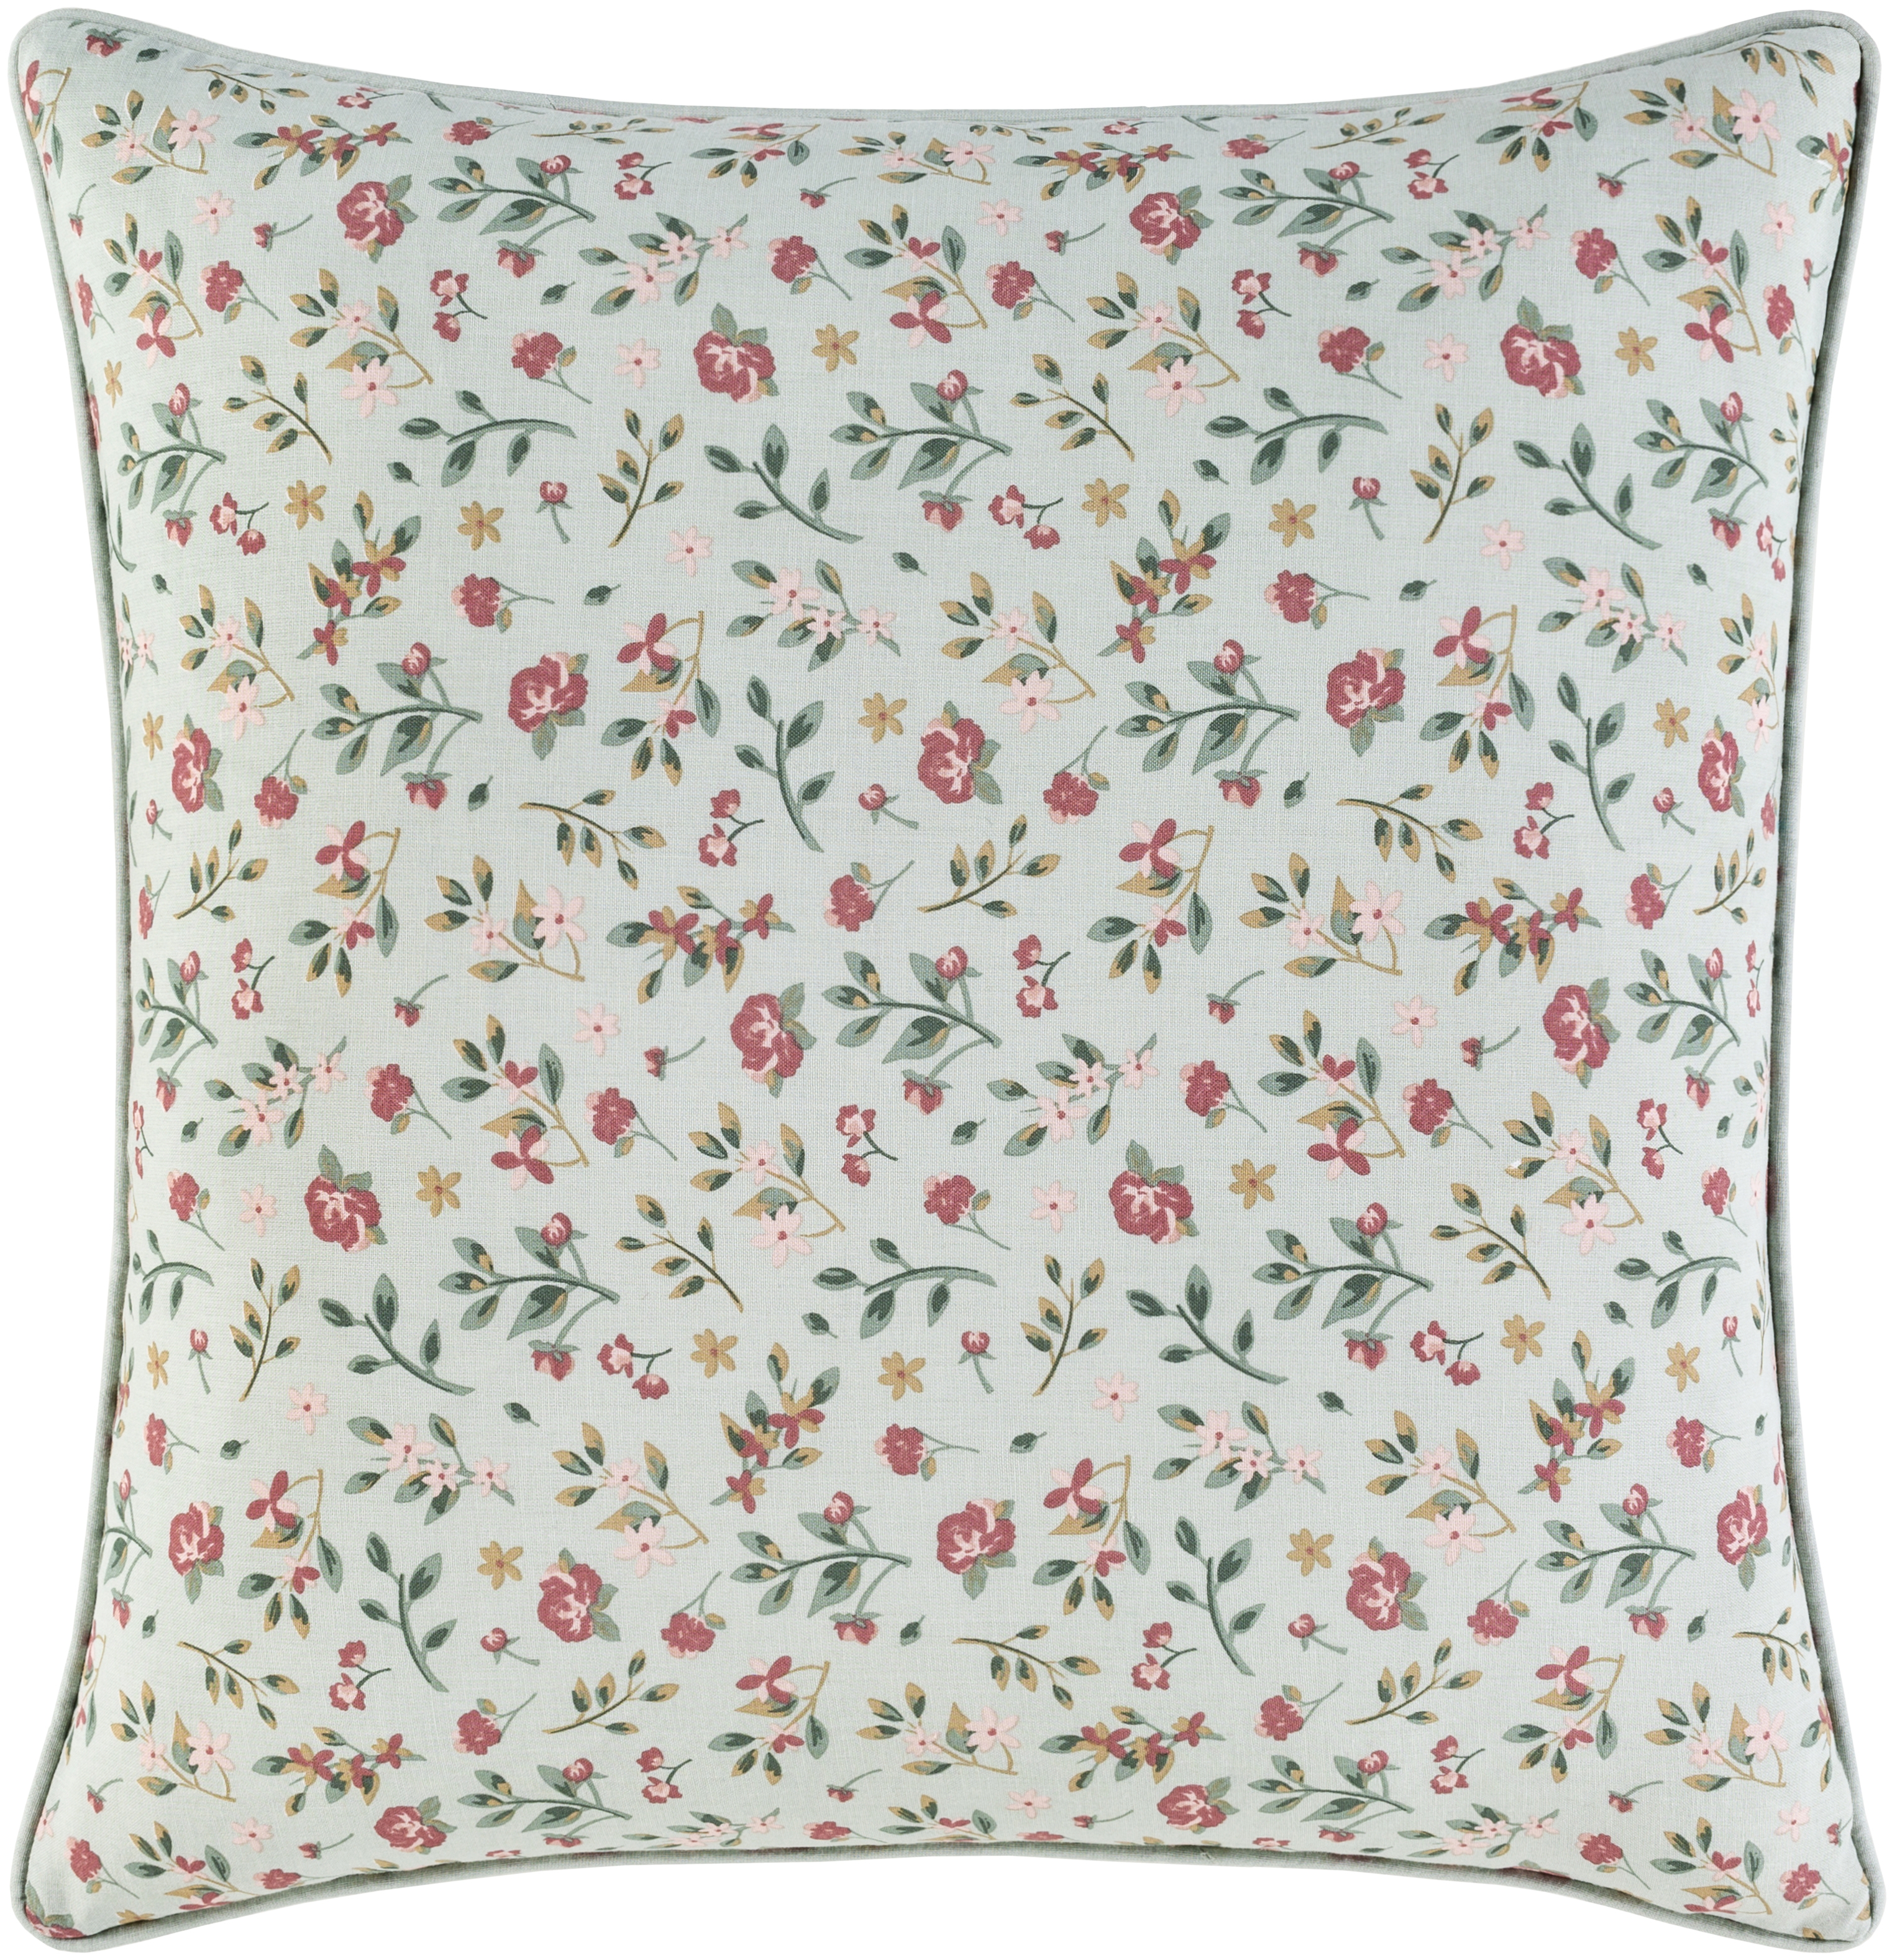 Floret Throw Pillow, 20" x 20", pillow cover only - Image 0